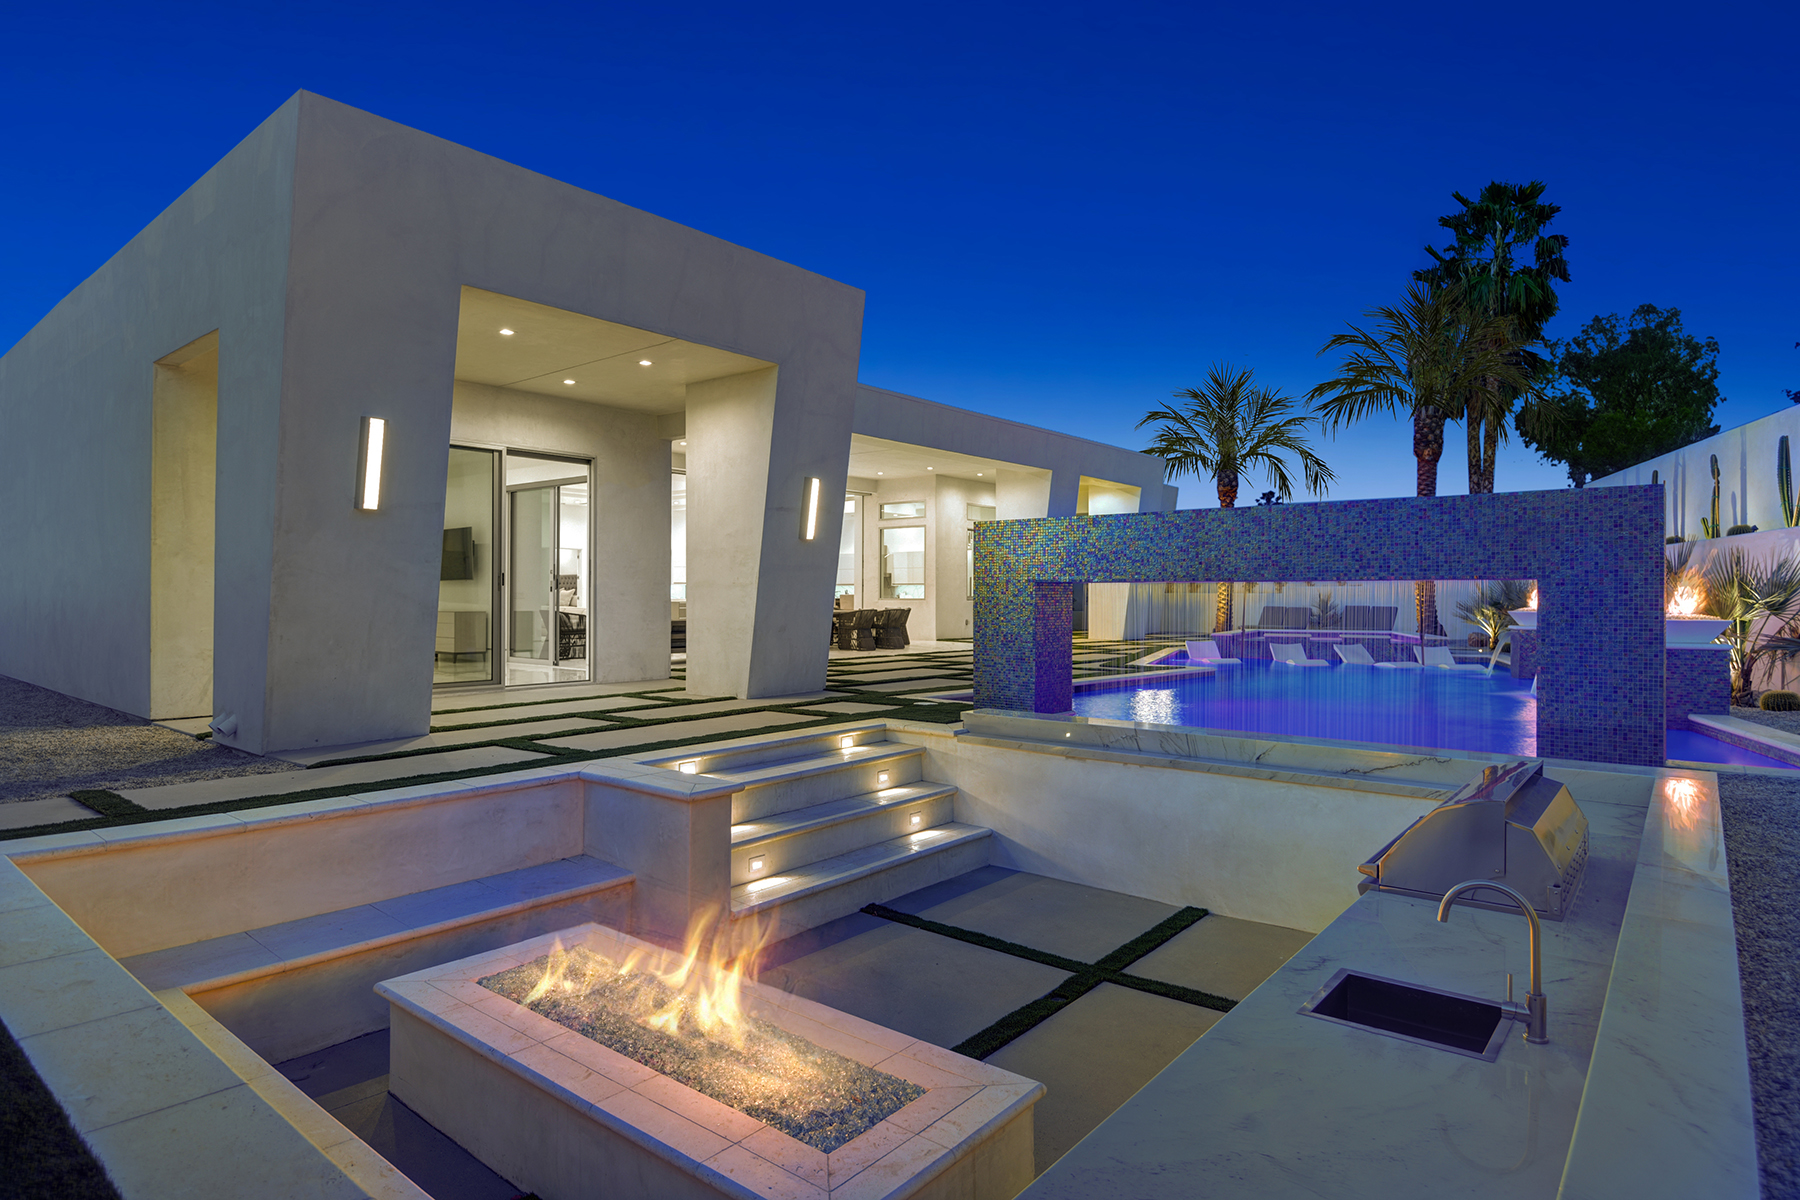 FIRE PIT AND BBQ TO POOL AND HOUSE NIGHT MLS.jpg